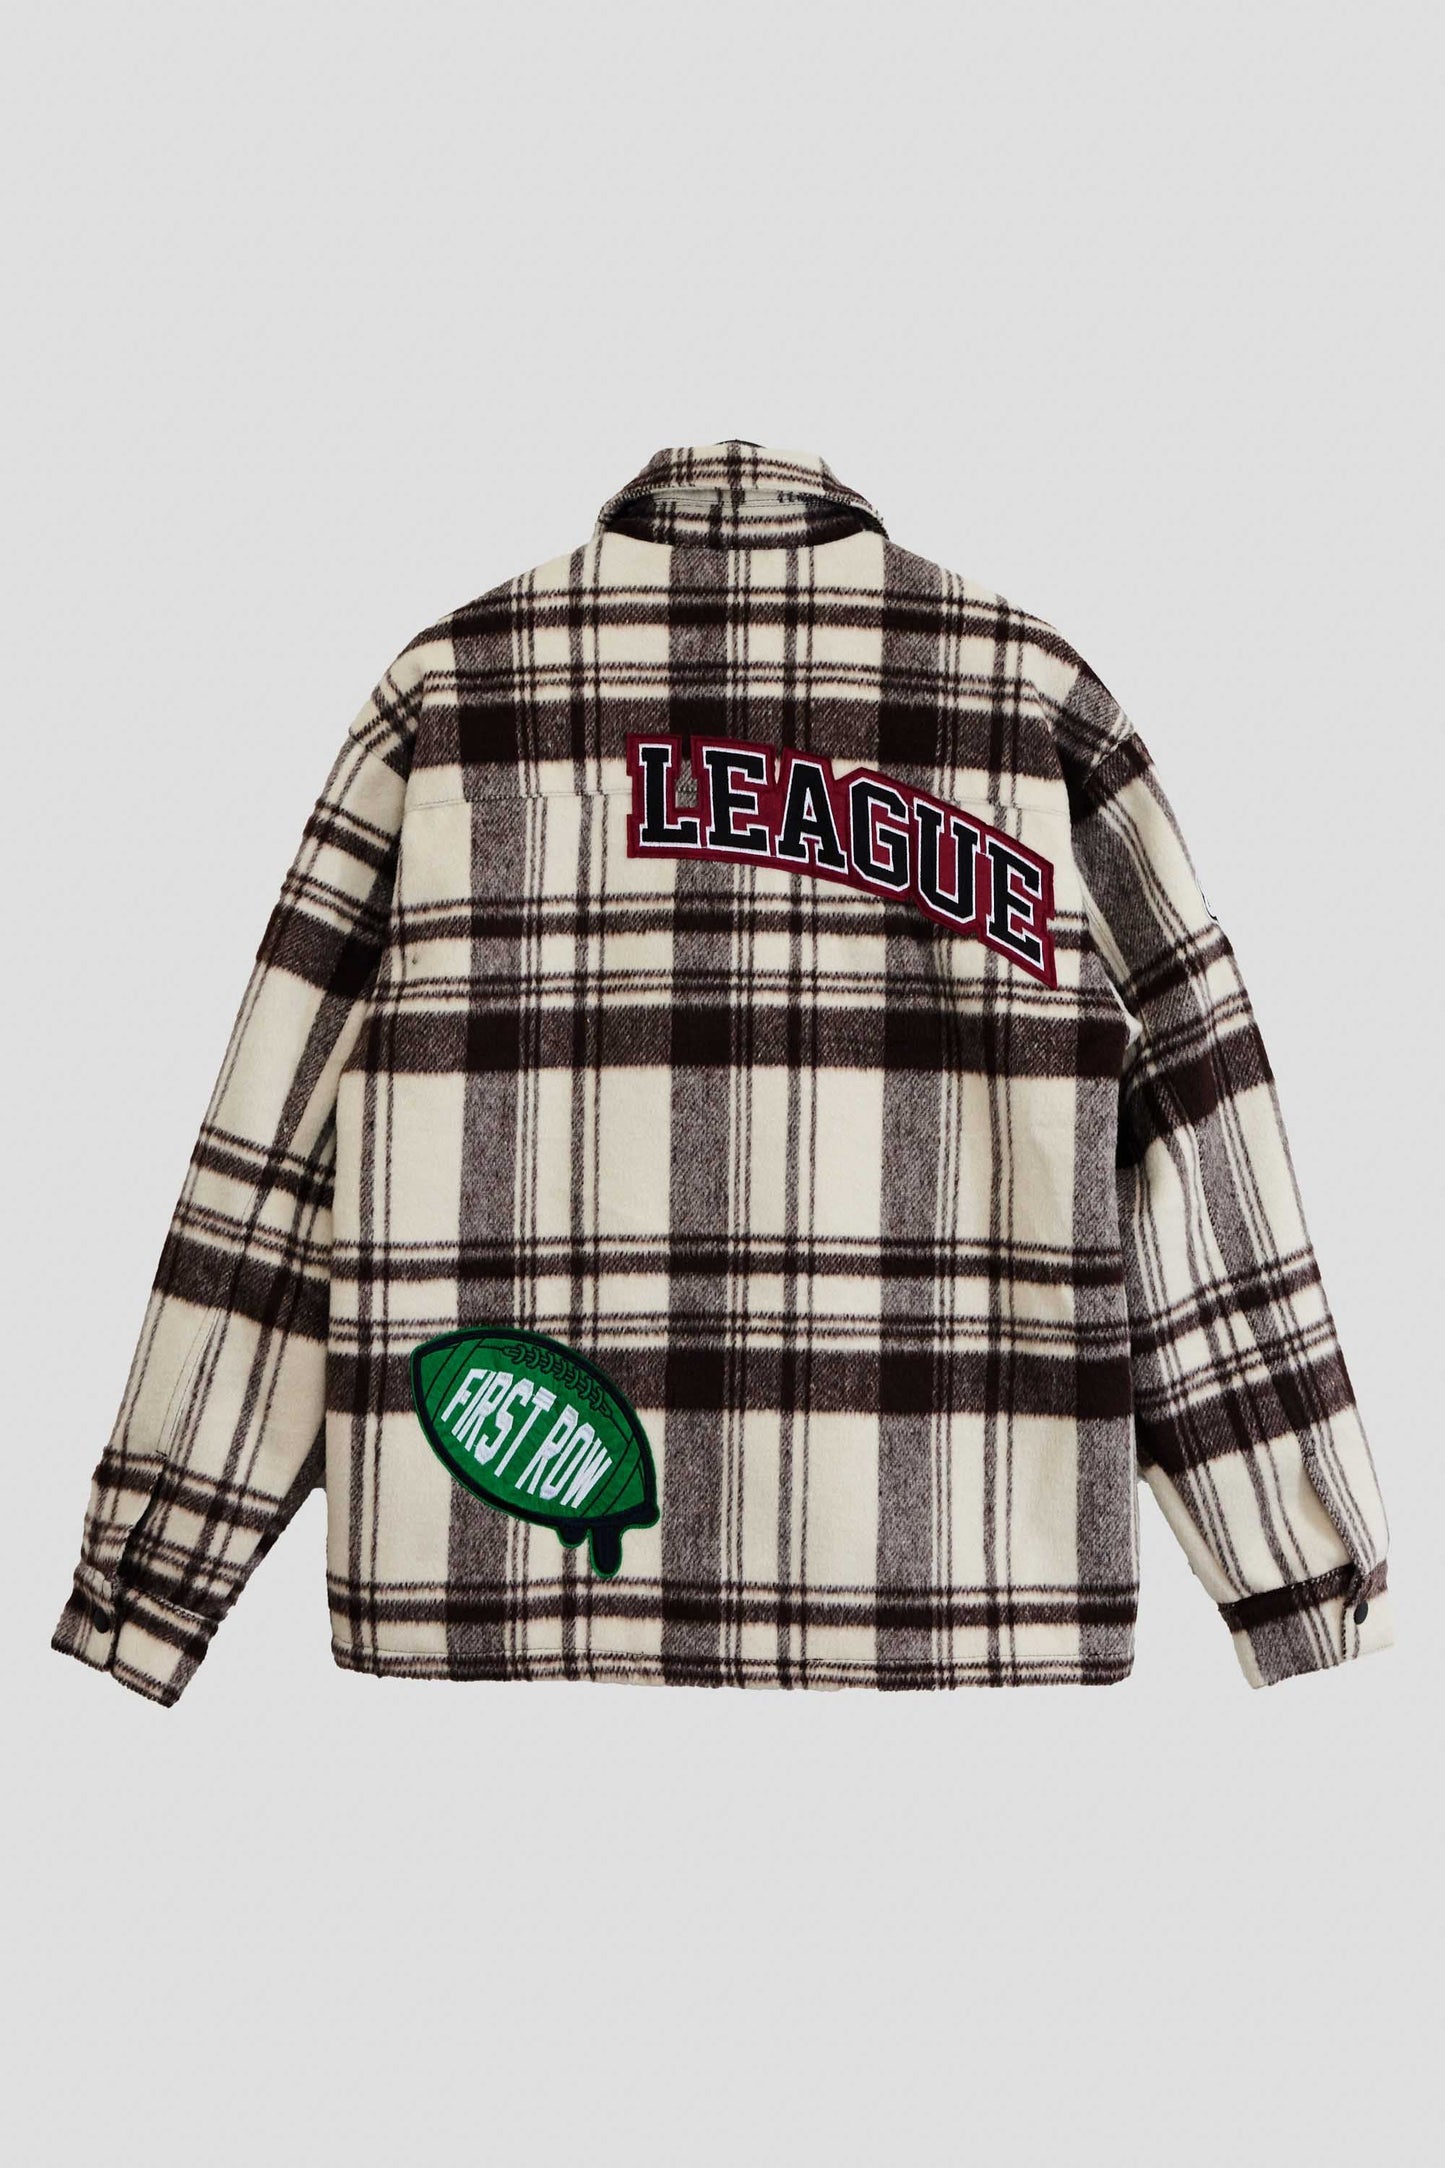 FIRST ROW PLAID FLANNEL JACKET - THE BEST NEVER REST.